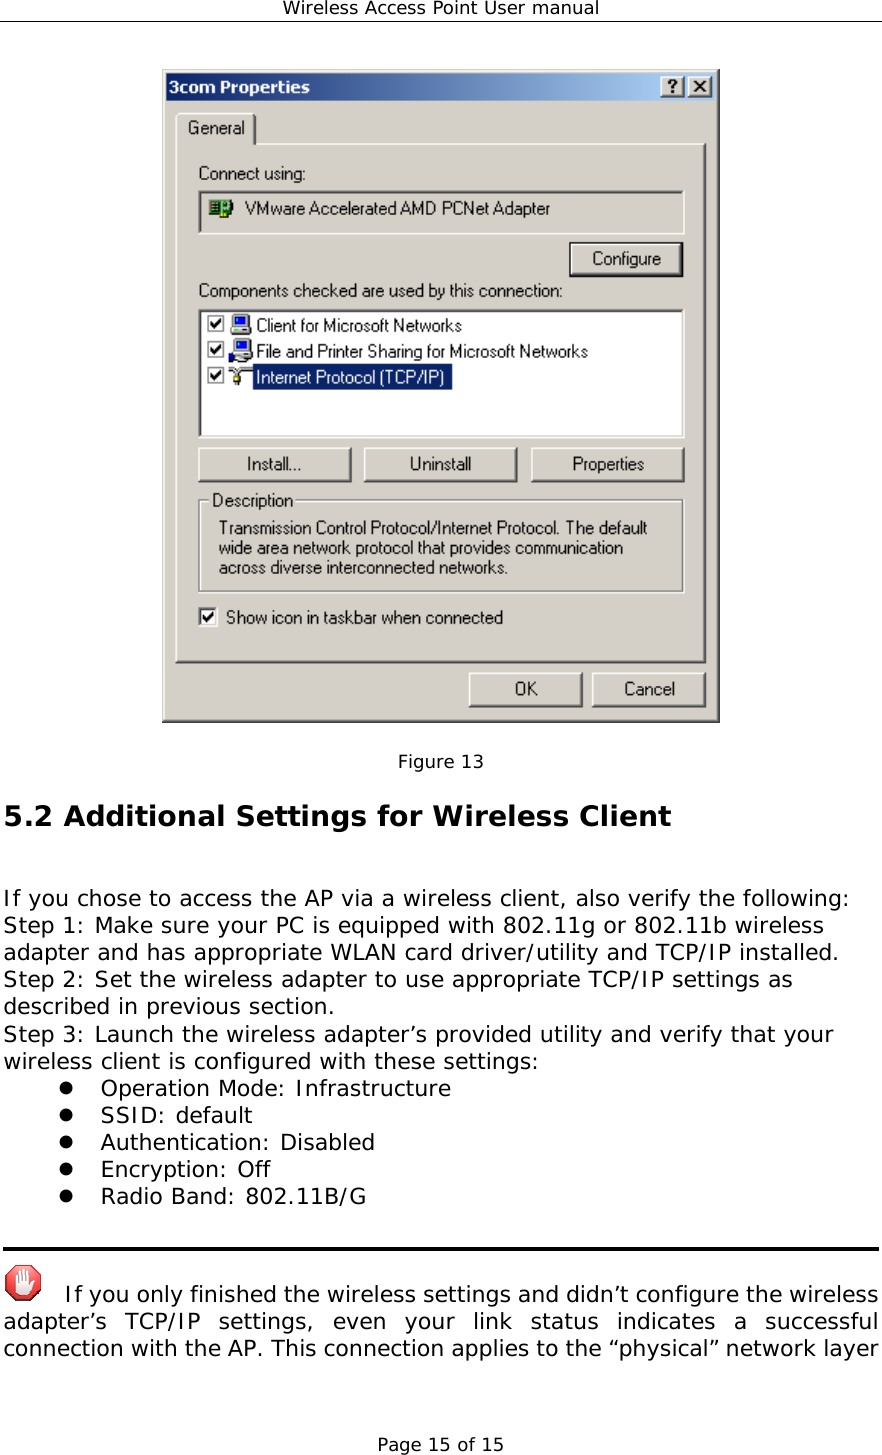 Wireless Access Point User manual Page 15 of 15   Figure 13 5.2 Additional Settings for Wireless Client If you chose to access the AP via a wireless client, also verify the following: Step 1: Make sure your PC is equipped with 802.11g or 802.11b wireless adapter and has appropriate WLAN card driver/utility and TCP/IP installed. Step 2: Set the wireless adapter to use appropriate TCP/IP settings as described in previous section. Step 3: Launch the wireless adapter’s provided utility and verify that your wireless client is configured with these settings:   Operation Mode: Infrastructure   SSID: default   Authentication: Disabled   Encryption: Off   Radio Band: 802.11B/G     If you only finished the wireless settings and didn’t configure the wireless adapter’s TCP/IP settings, even your link status indicates a successful connection with the AP. This connection applies to the “physical” network layer 